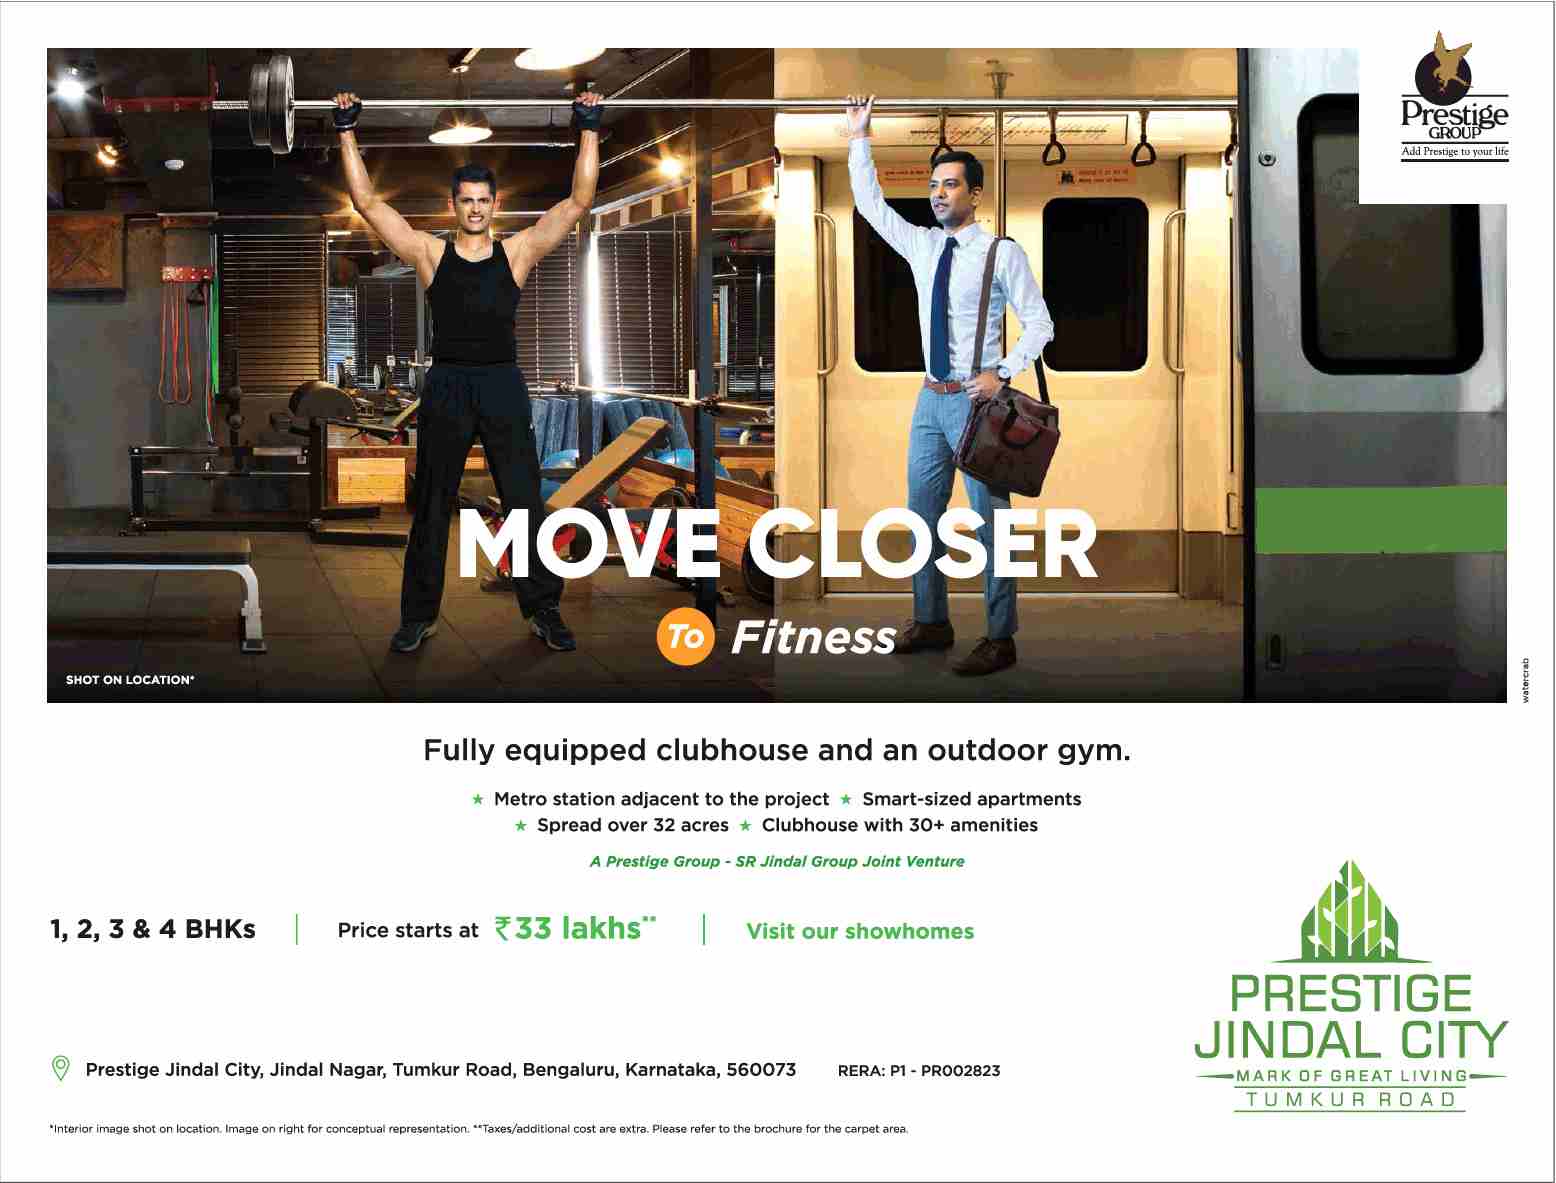 Move closer to fitness with fully equipped clubhouse &  outdoor gym at Prestige Jindal City in Bangalore Update